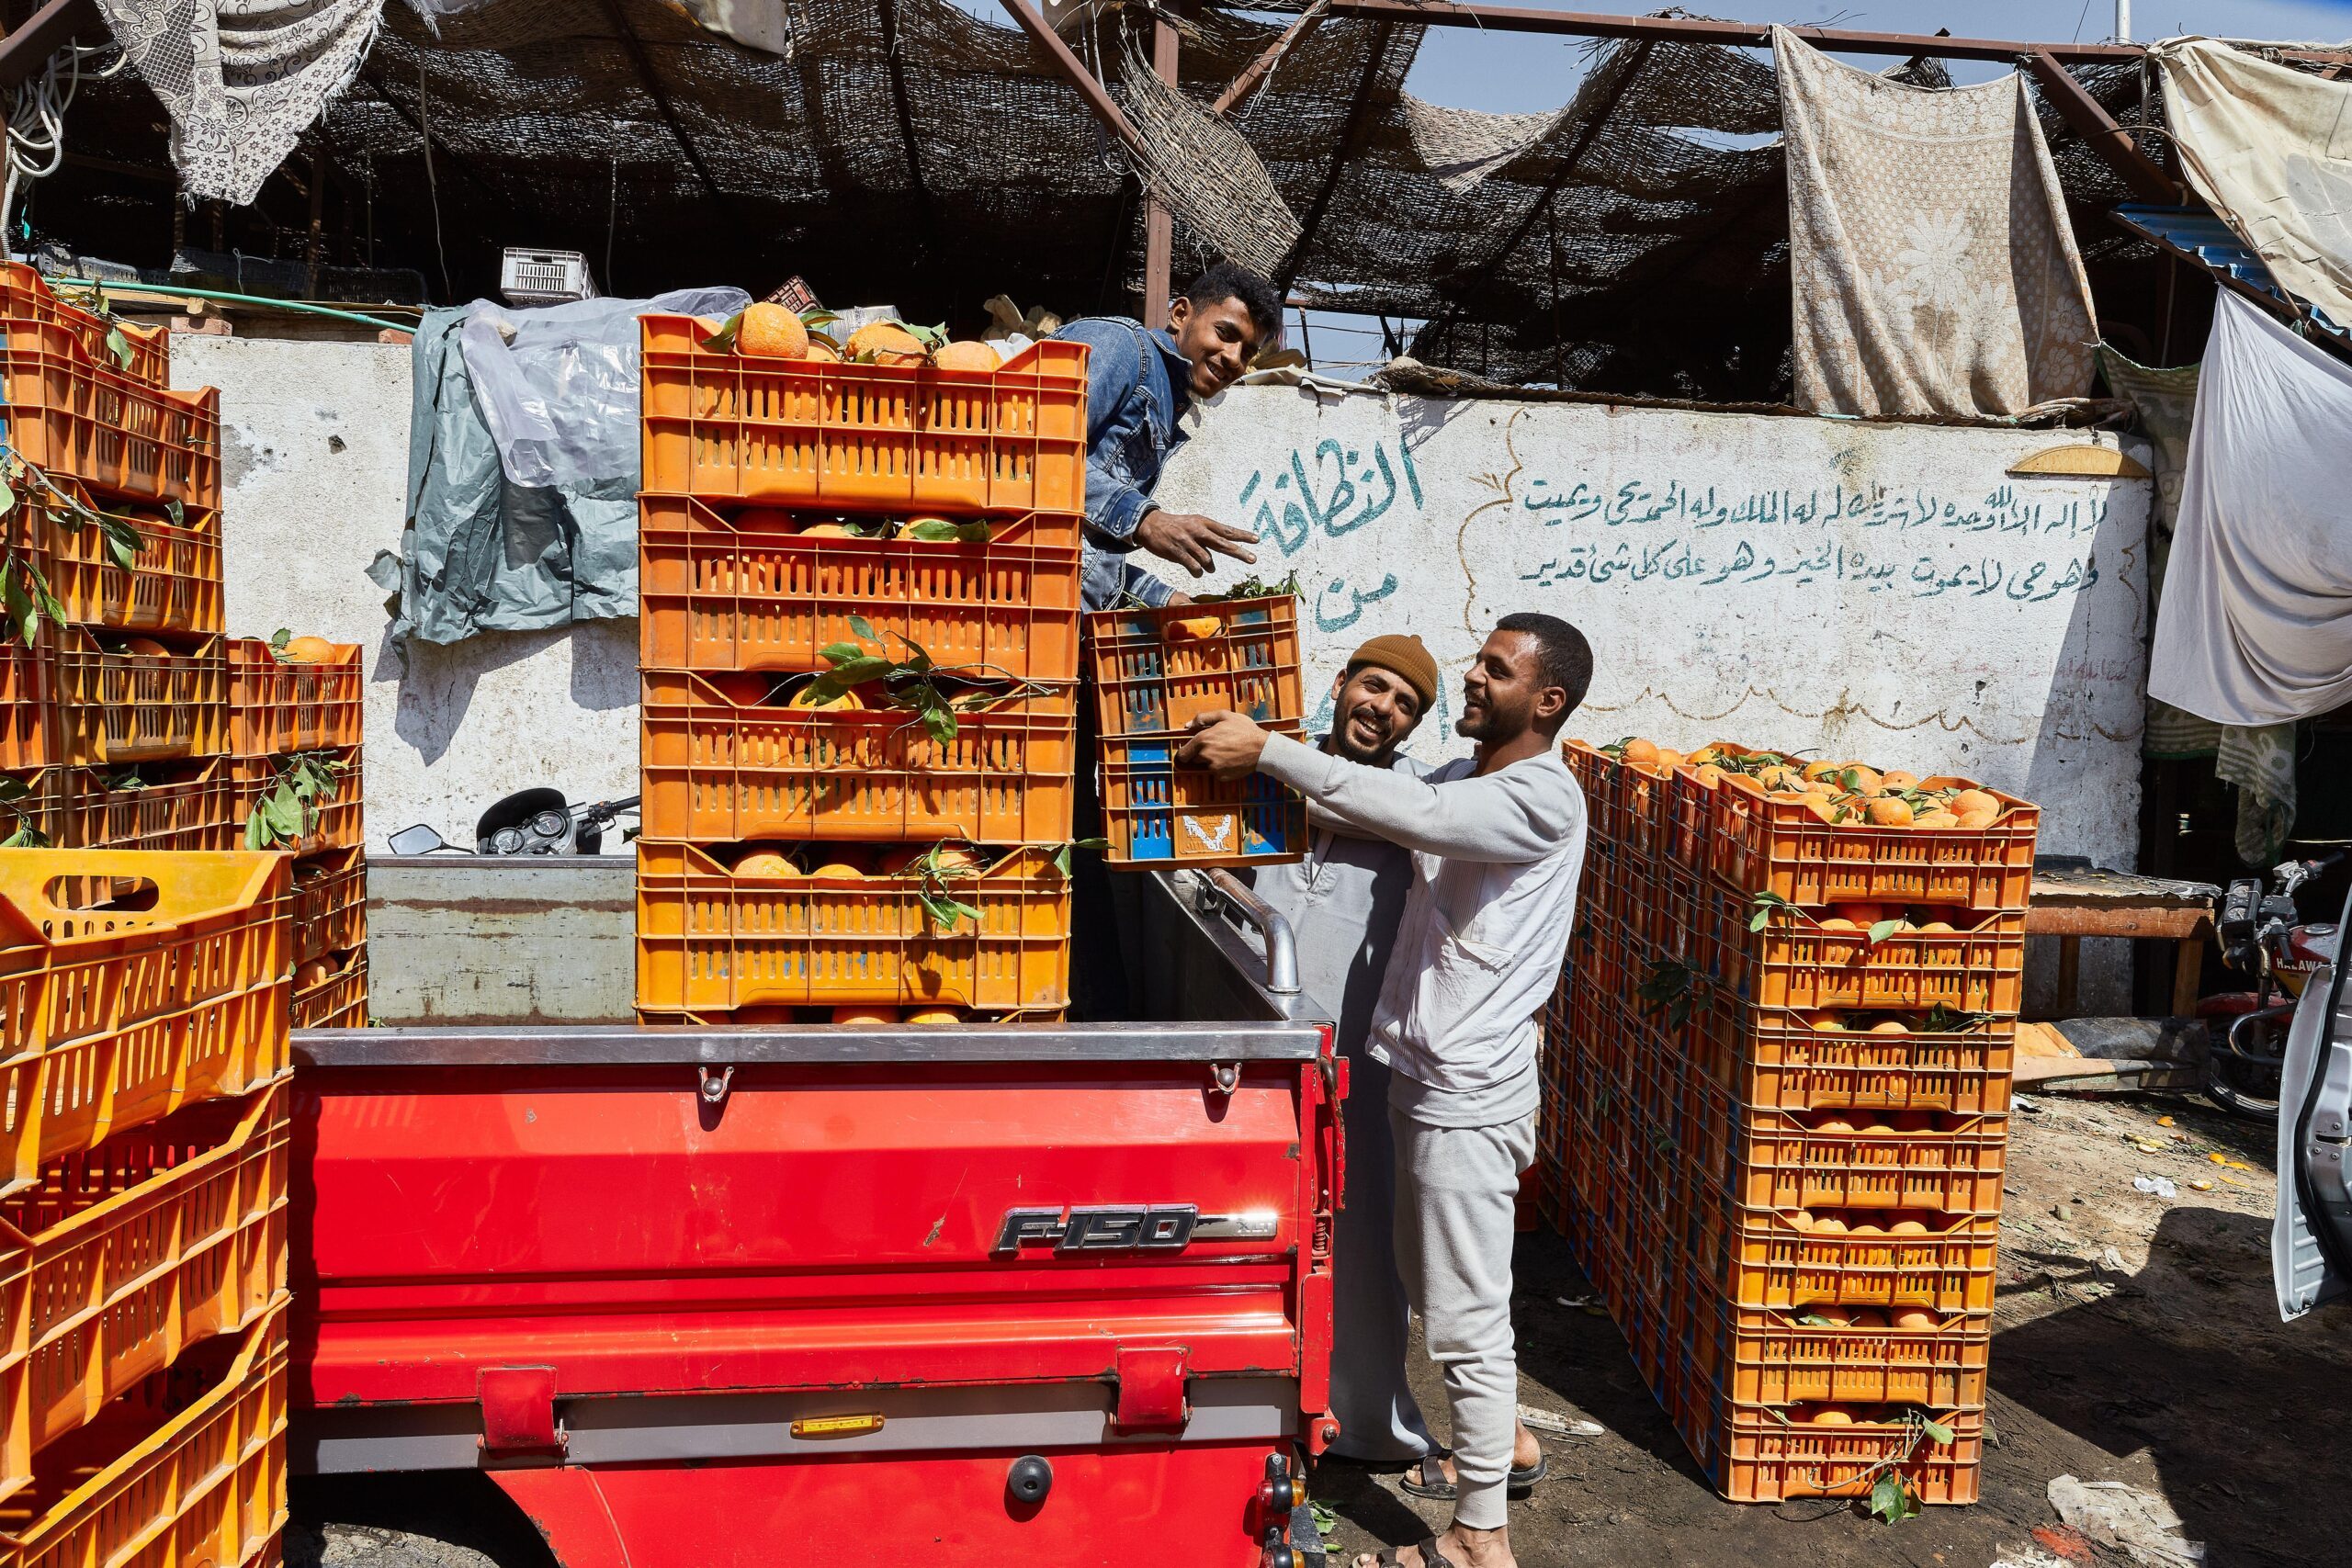 Citrus fruits were Egypt's largest agricultural export, and its orange exports are predicted to reach 2 million tonnes